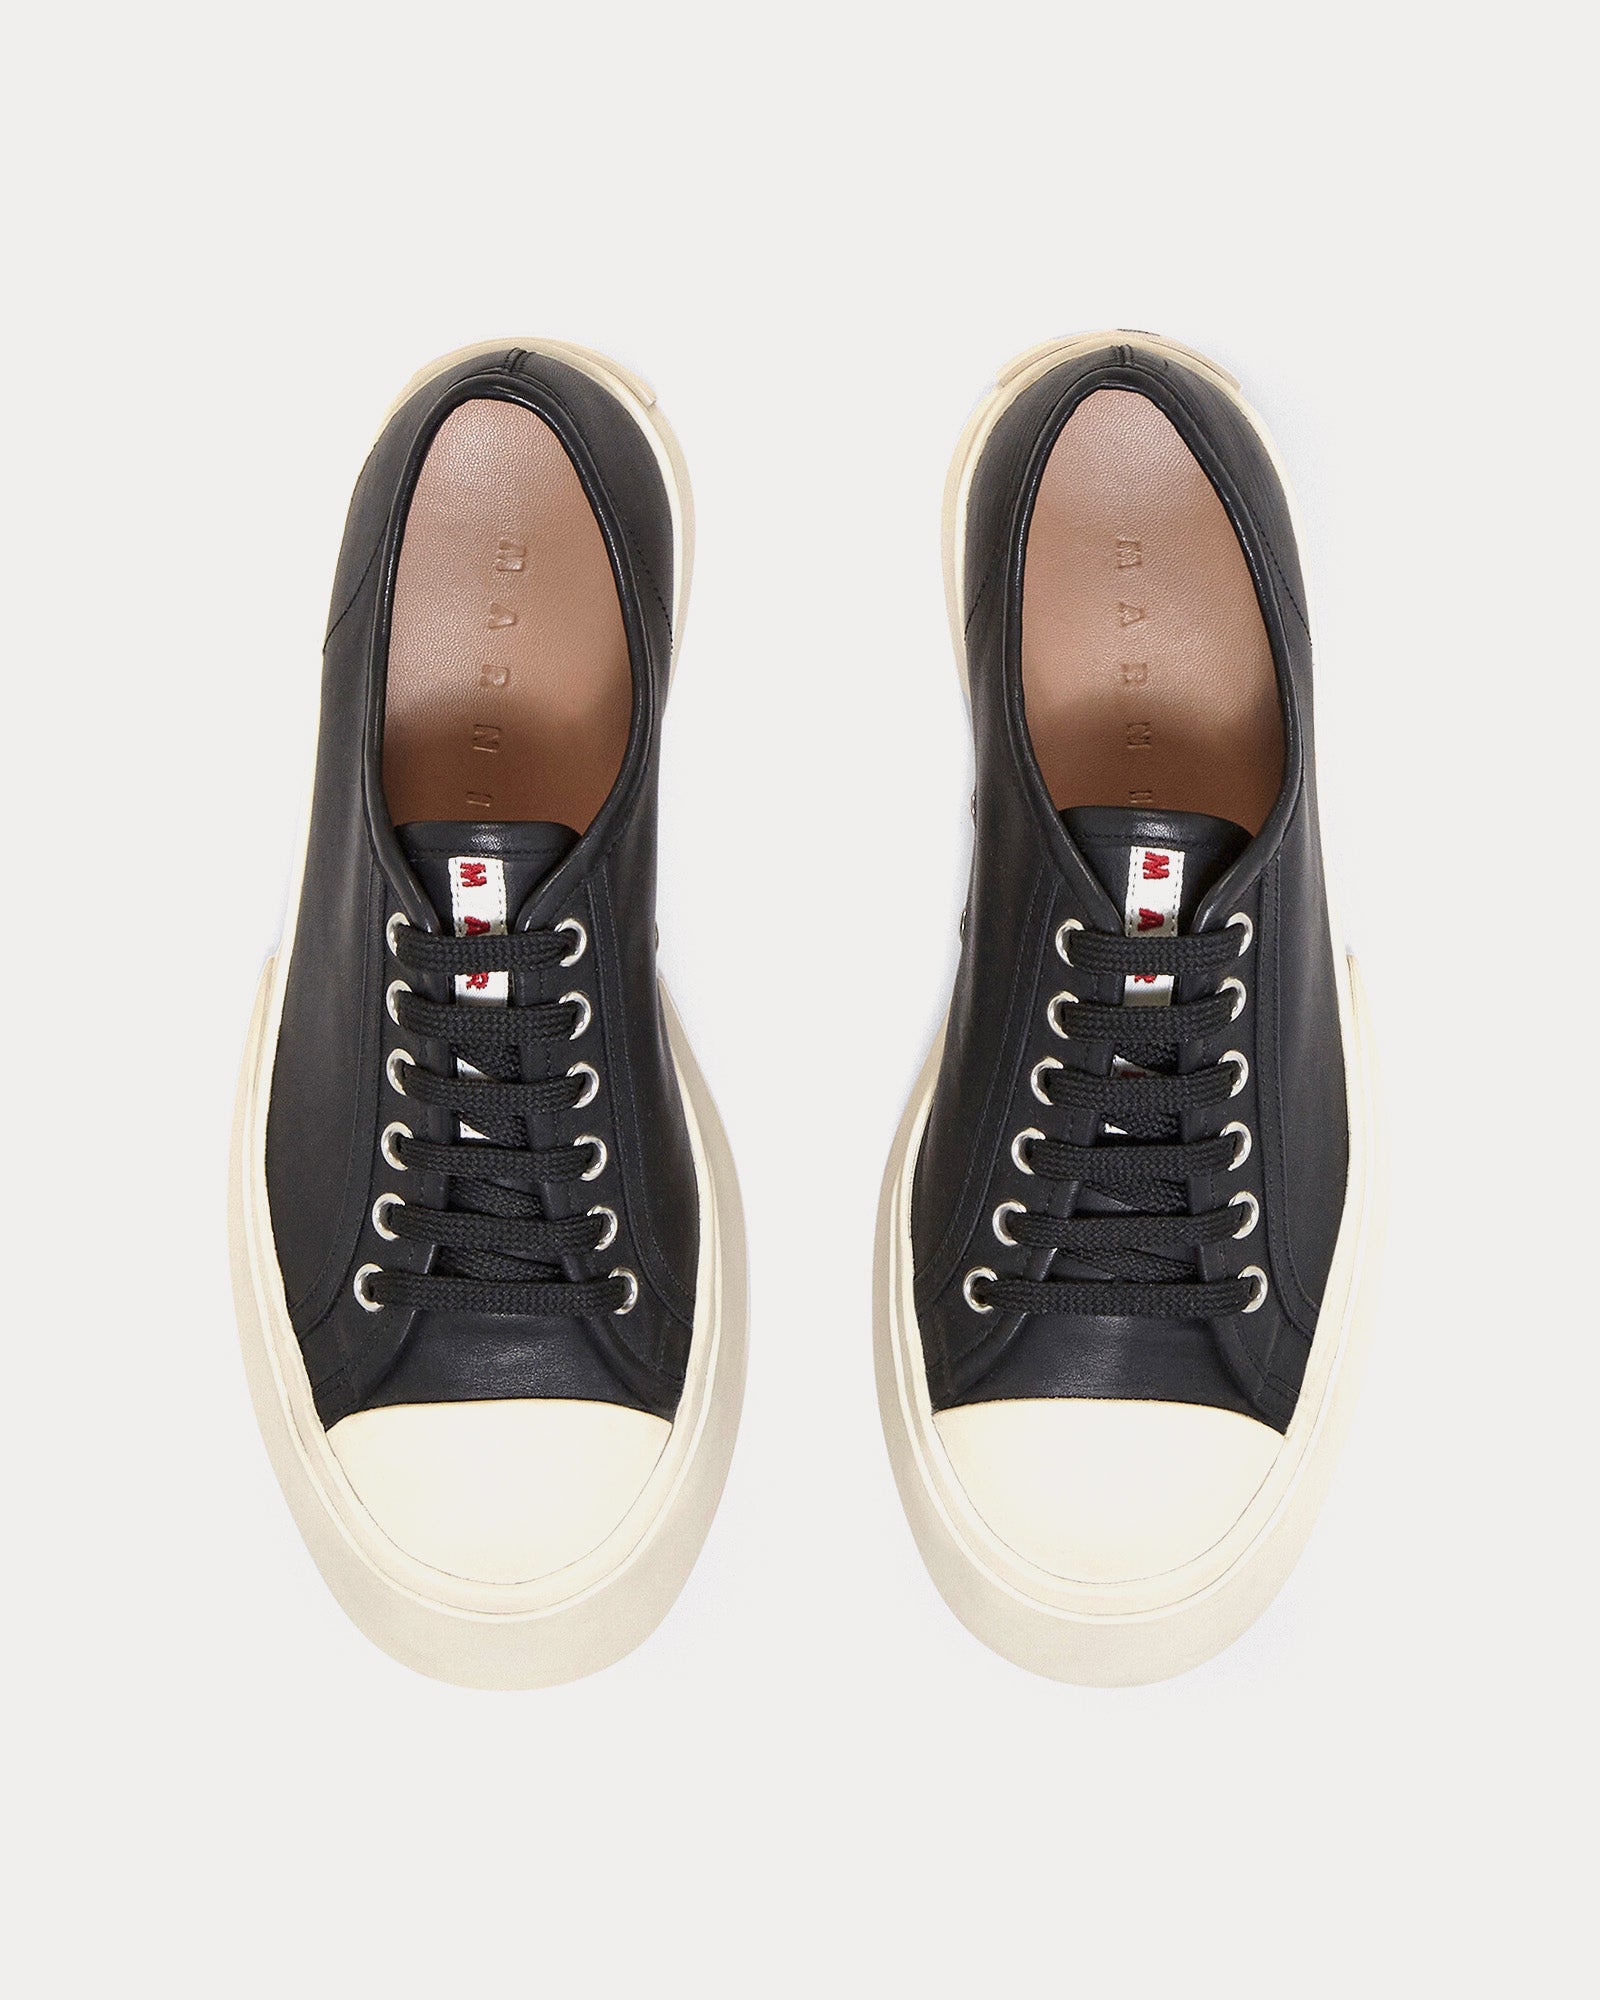 Marni - Pablo Leather Black Low Top Sneakers